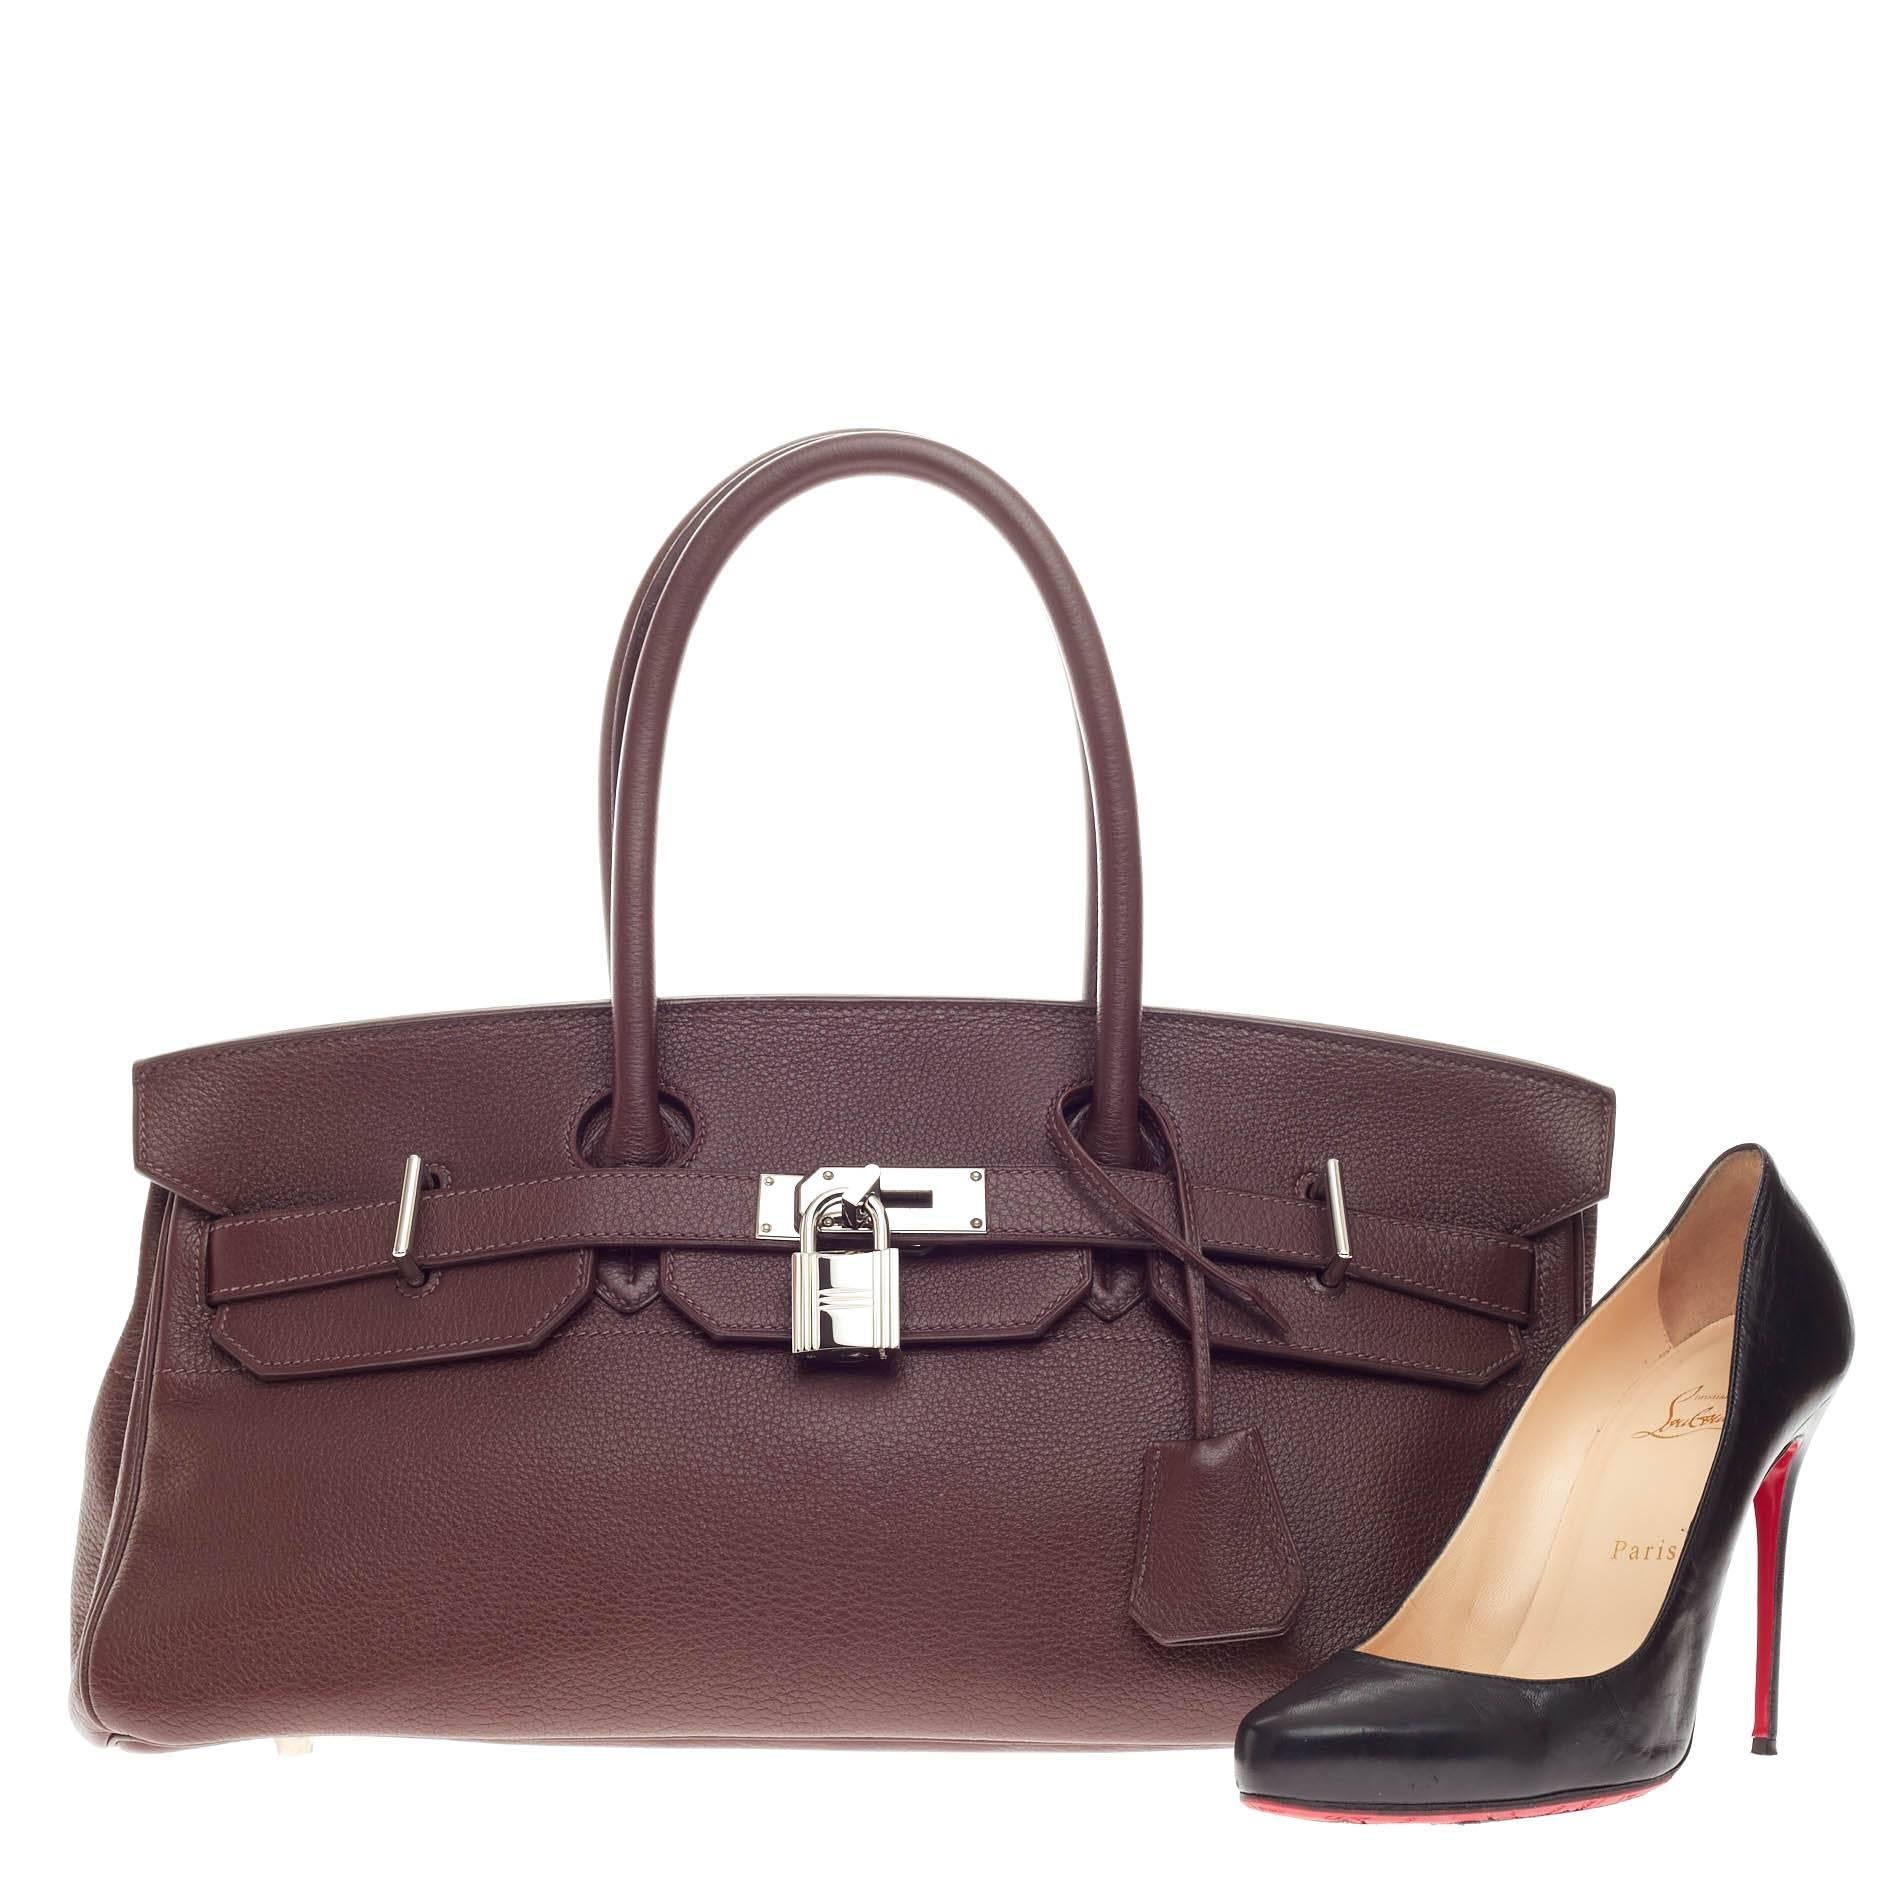 This authentic Hermes Birkin JPG Chocolate Clemence with Palladium Hardware 42 aptly named from its designer Jean Paul Gaultier is an elongated reinterpretation of the Hermes' classic Birkin design. Crafted in brown clemence leather, this shoulder